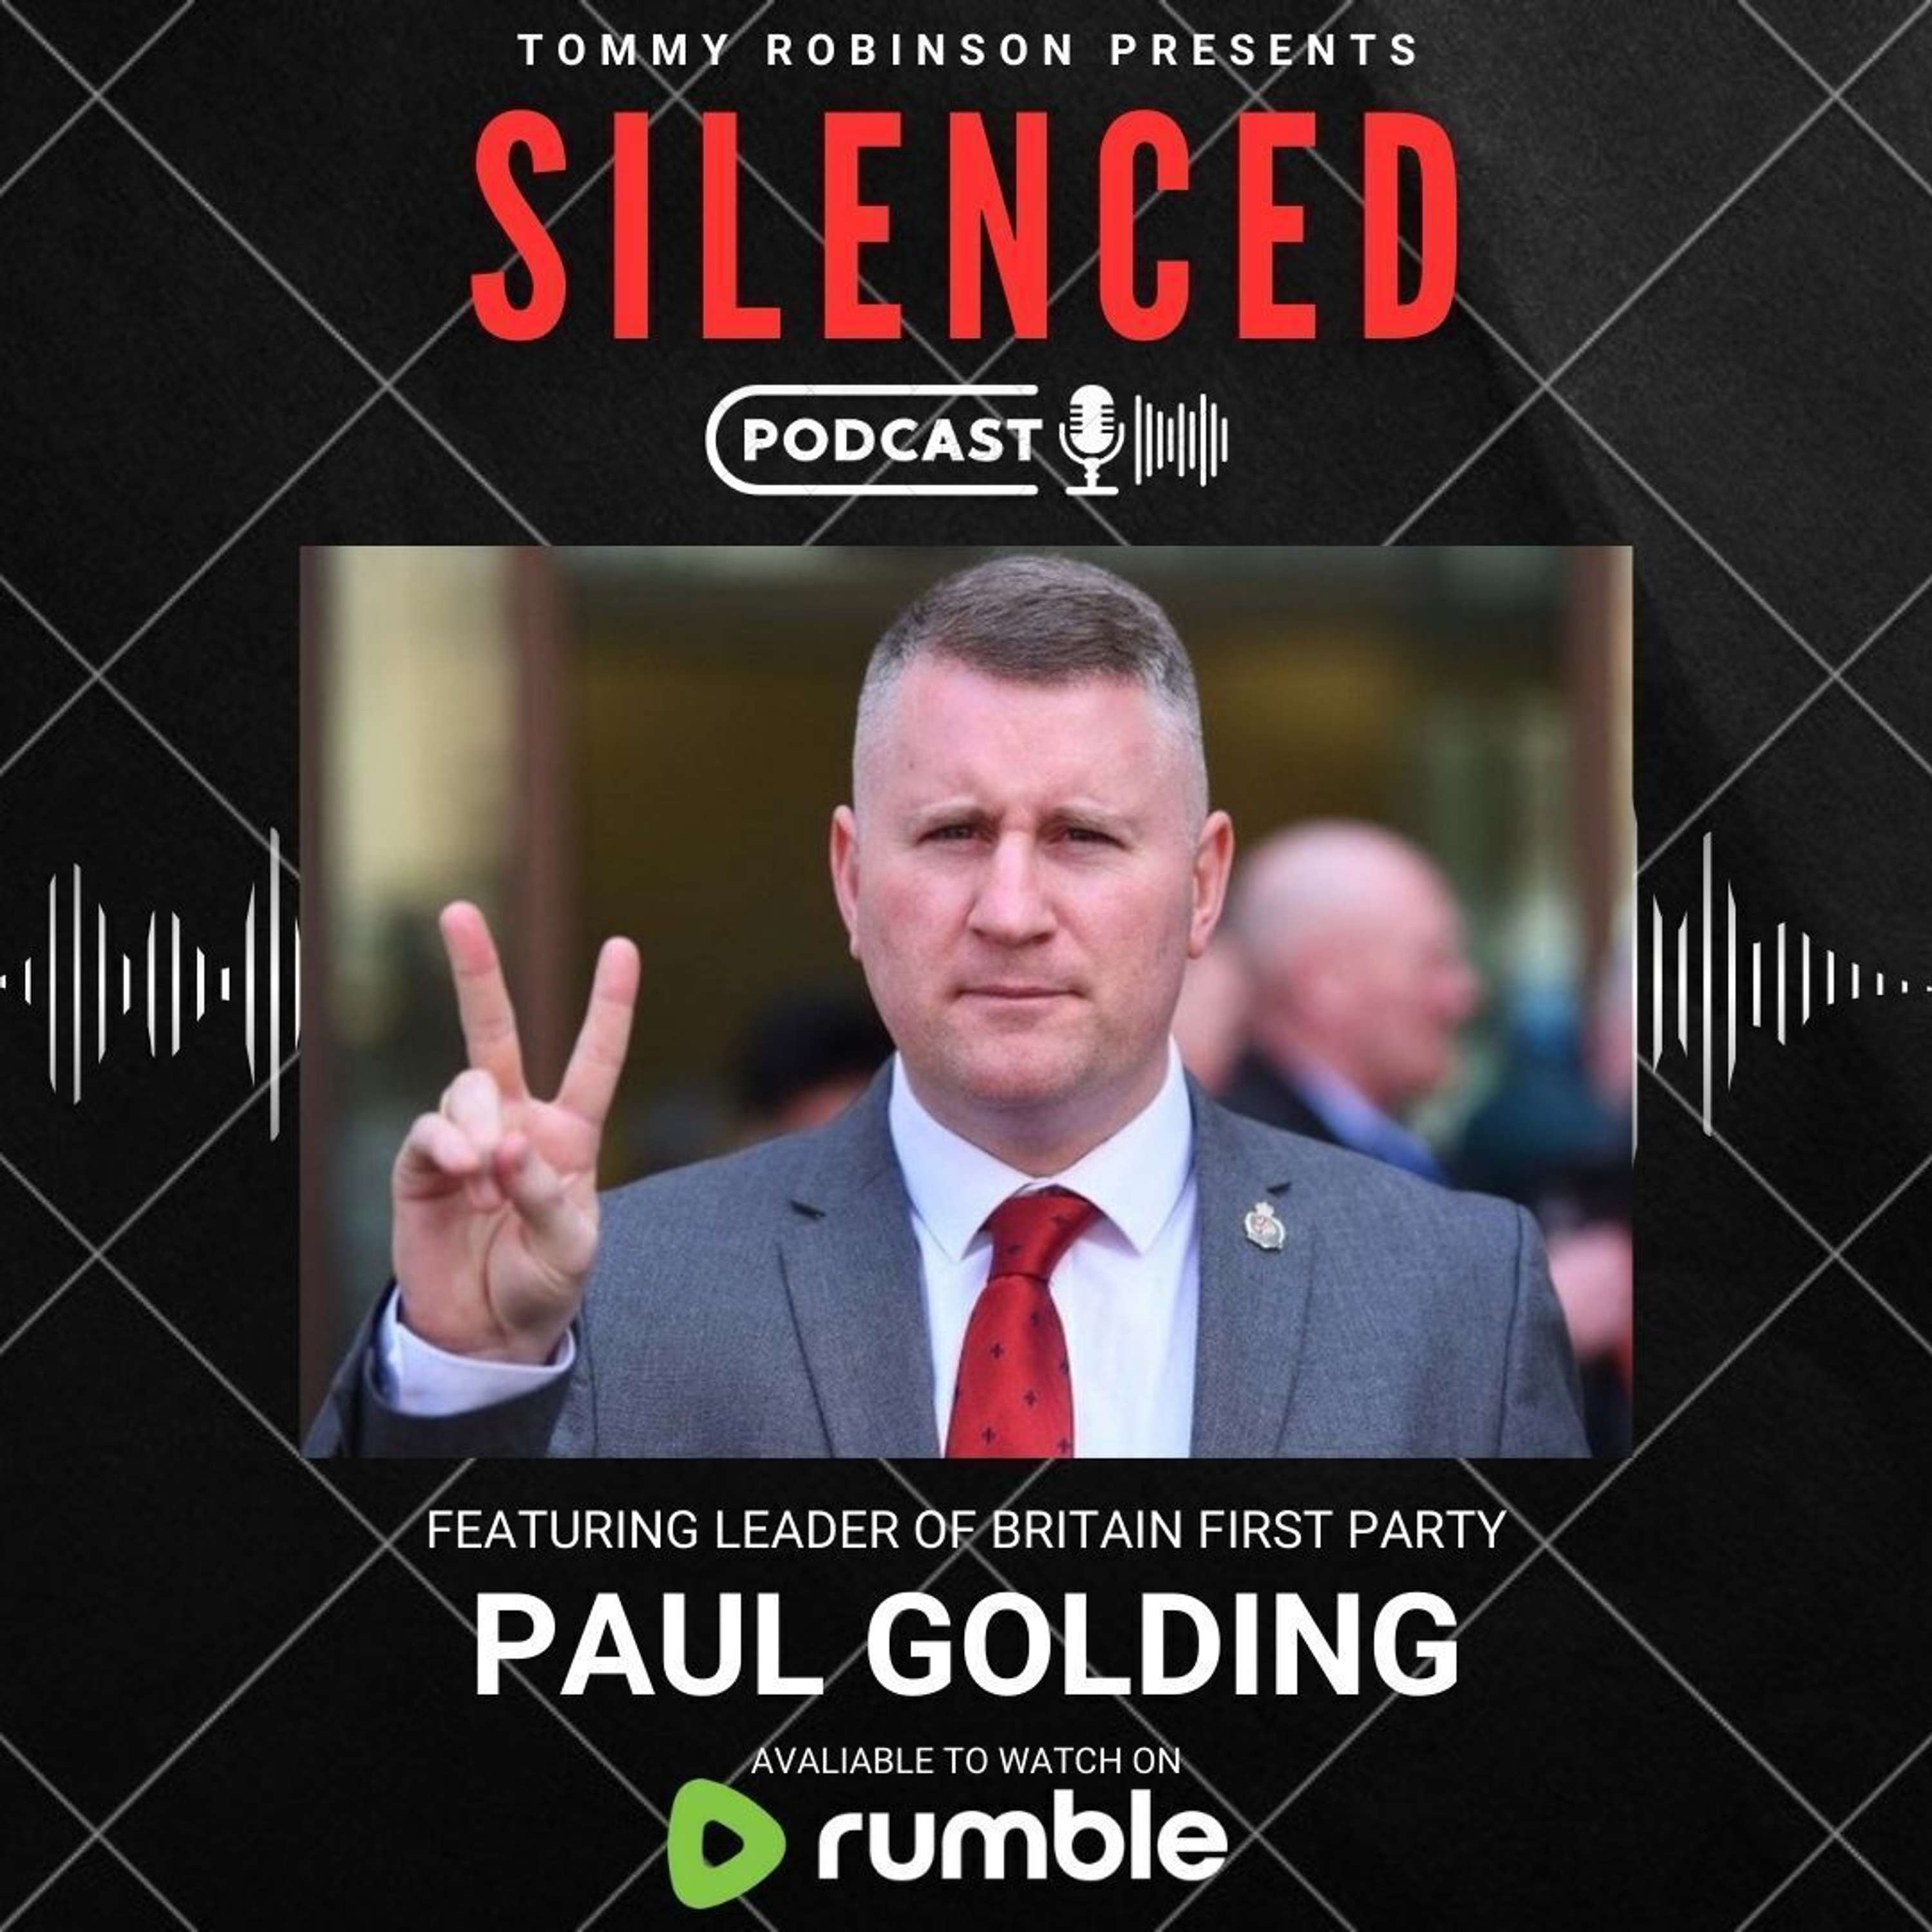 Episode 23 - SILENCED with Tommy Robinson - Paul Golding